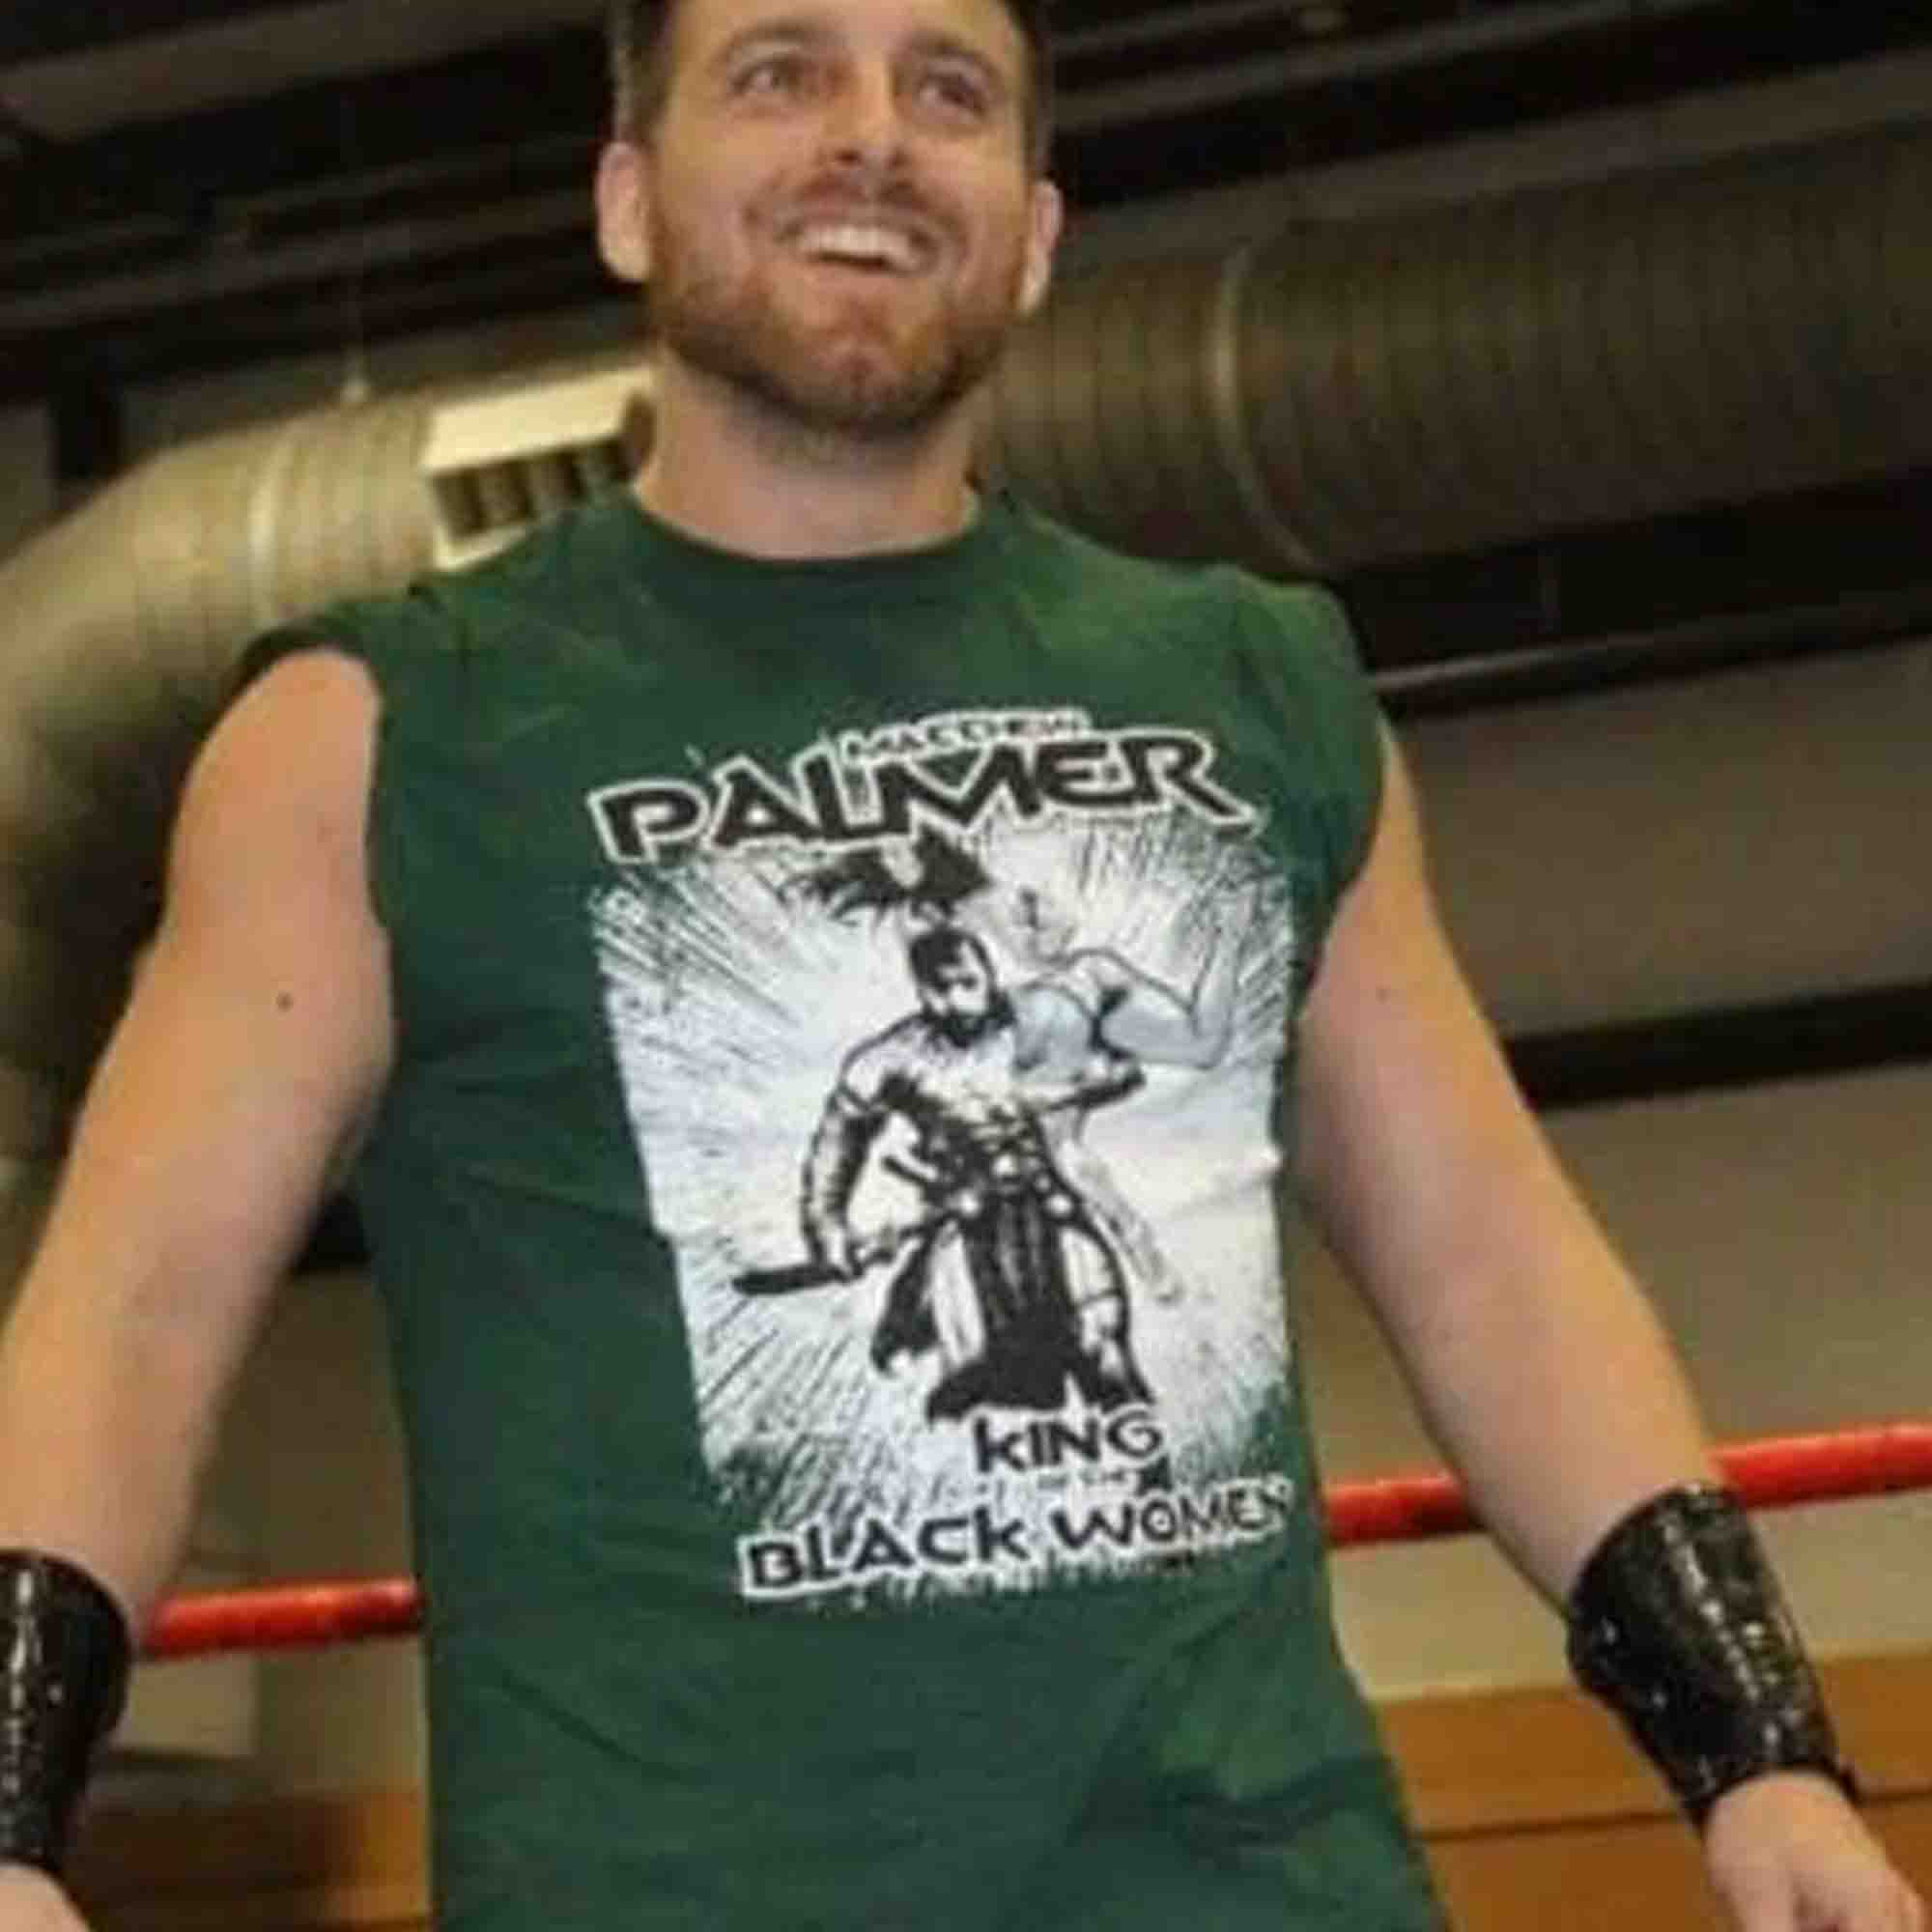 Ember Moon’s Husband New Shirt Could Be A Little Racially Insensitive